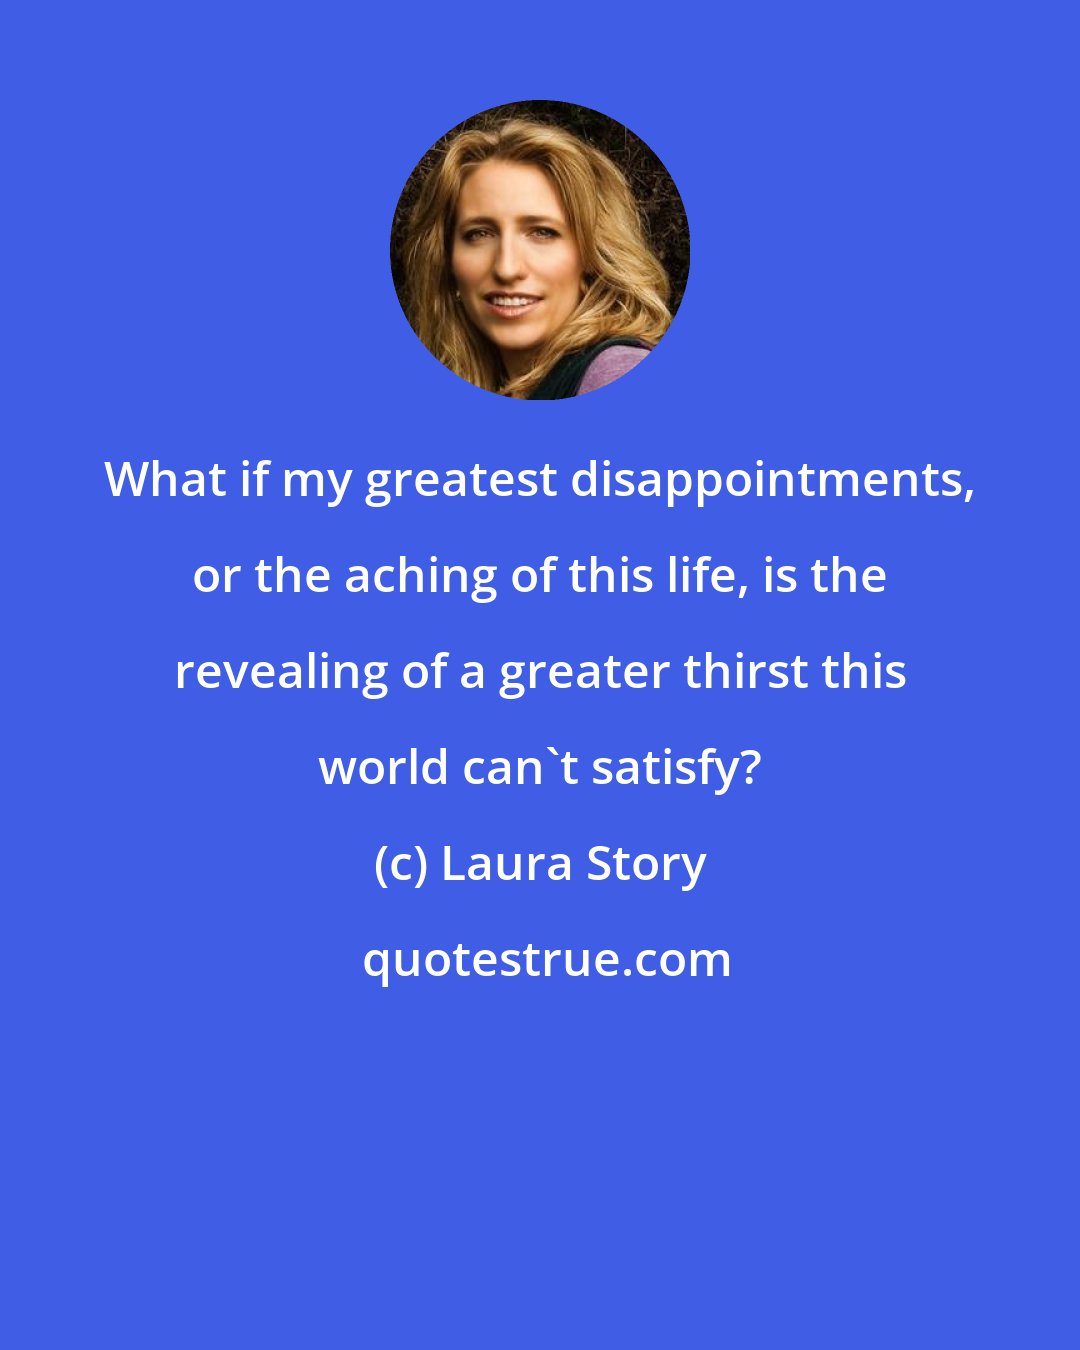 Laura Story: What if my greatest disappointments, or the aching of this life, is the revealing of a greater thirst this world can't satisfy?